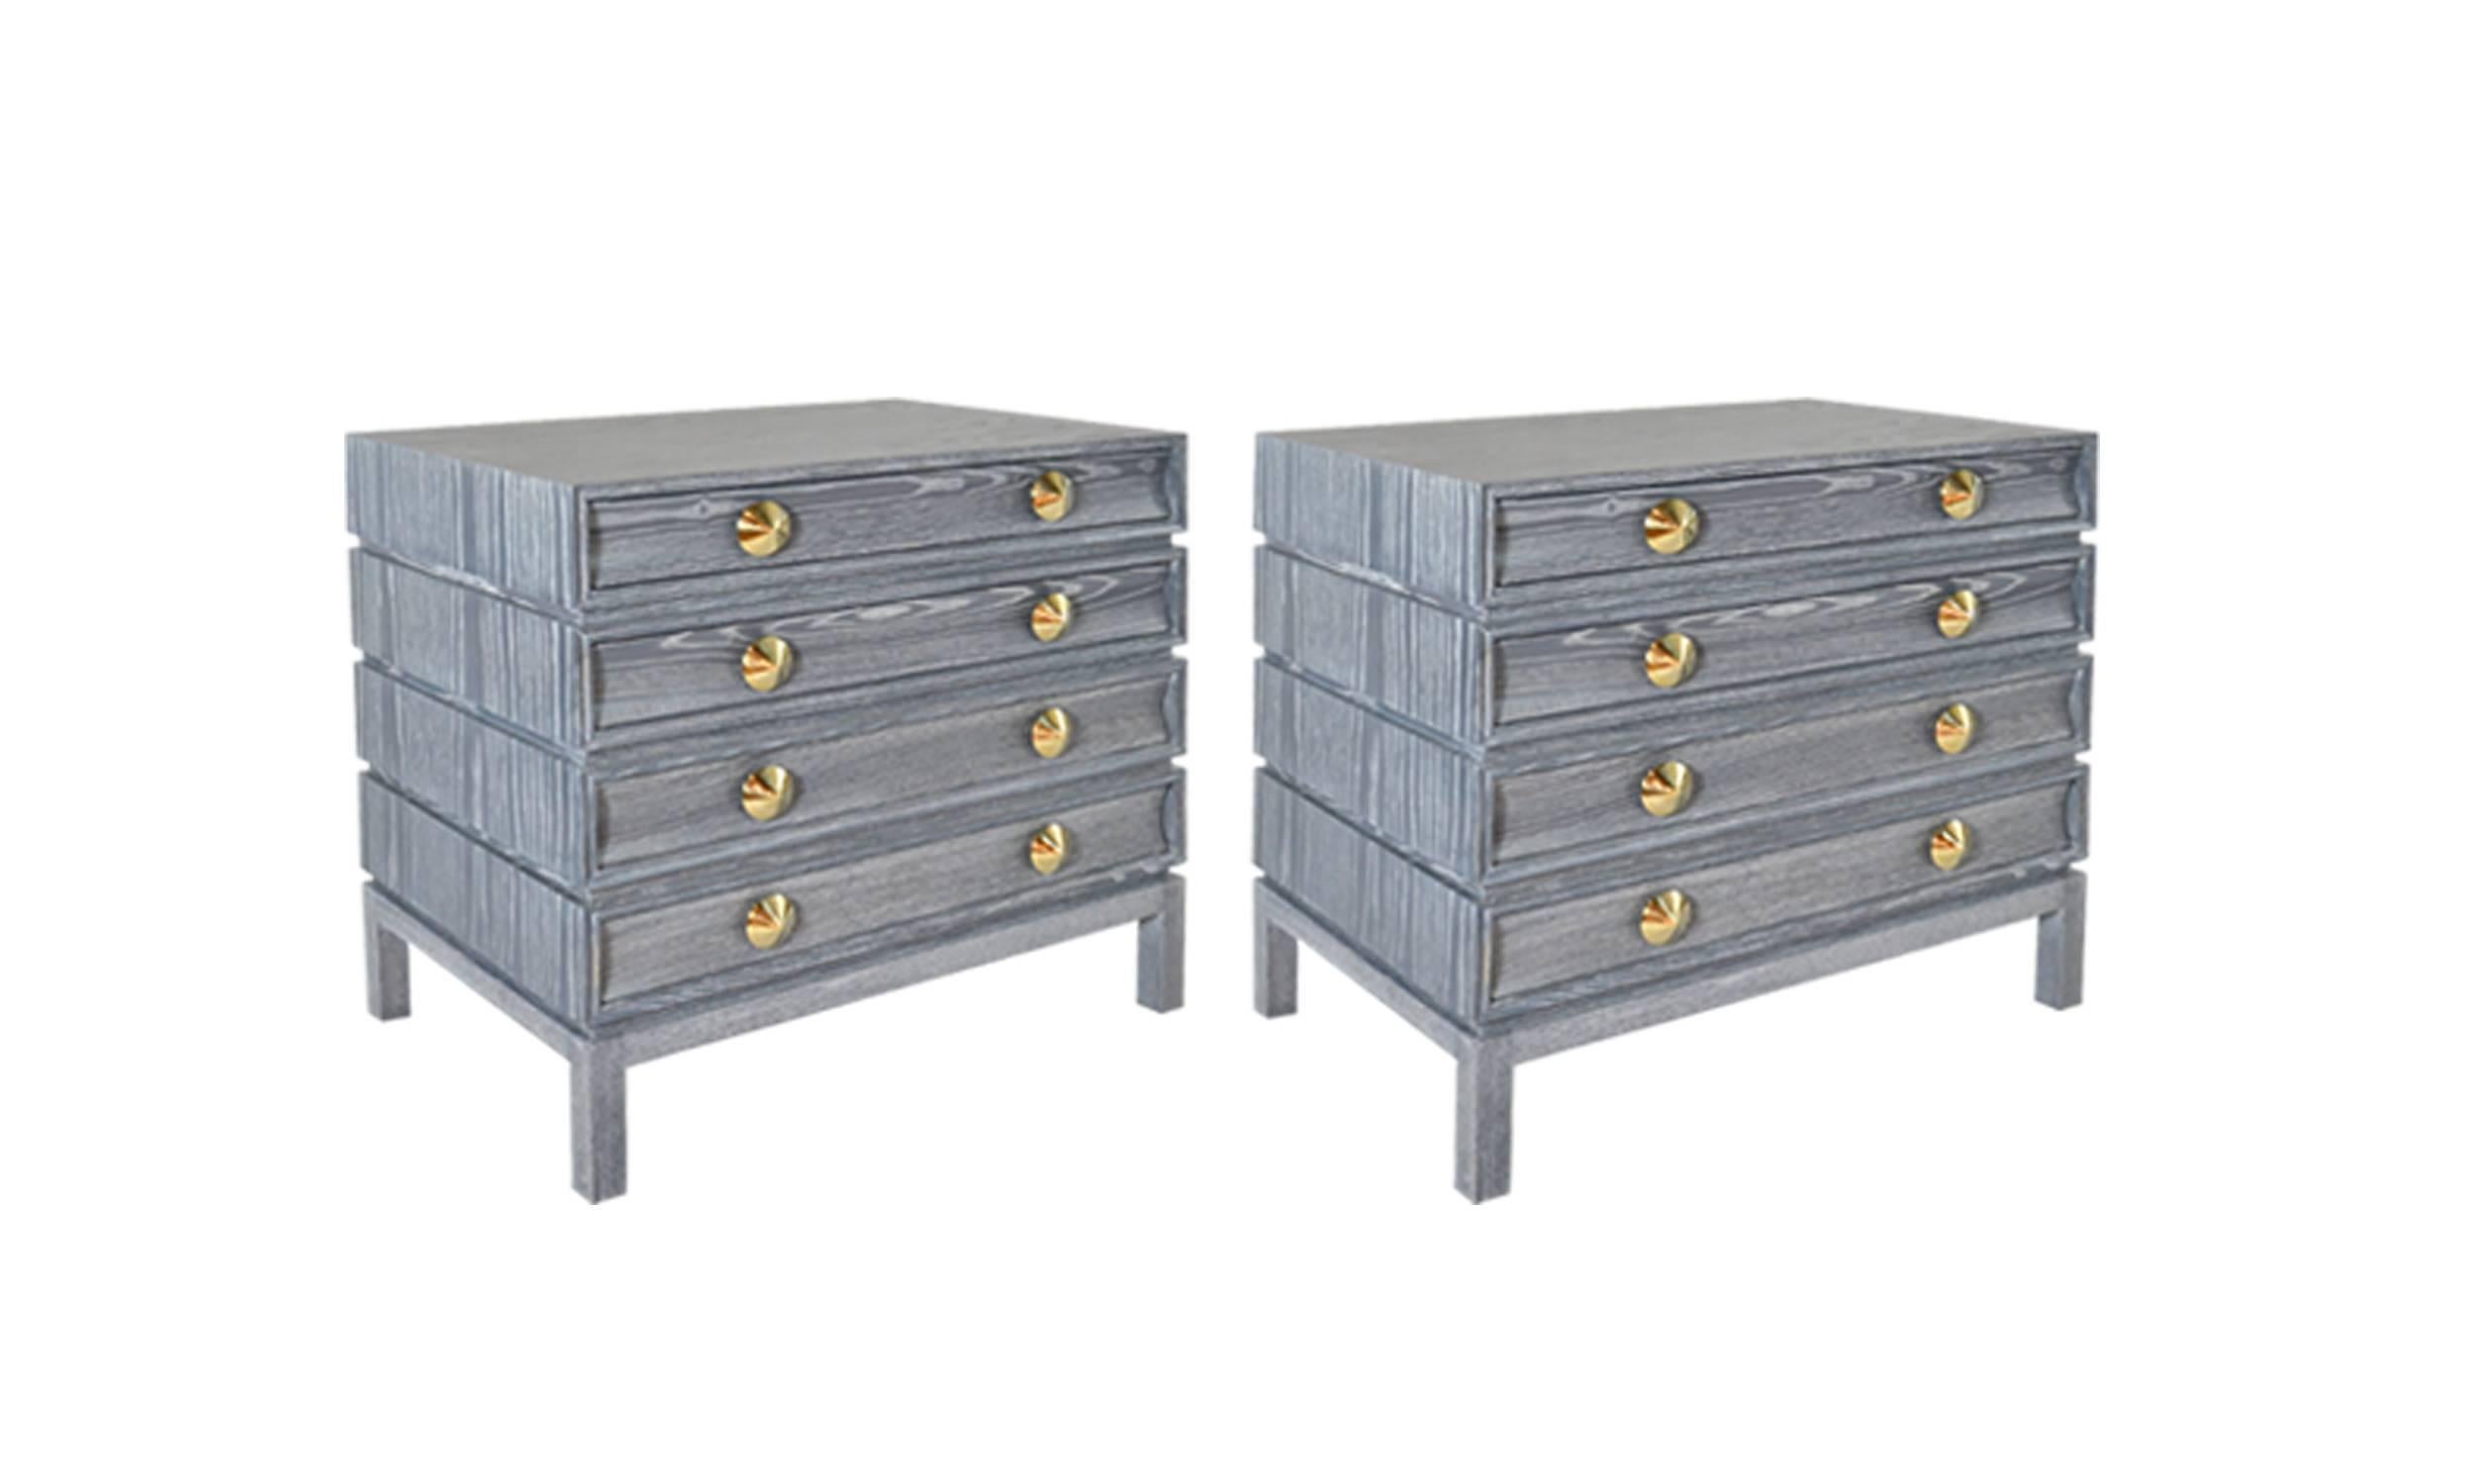 Paul Frankl inspired pair of bedside tables designed and manufactured by Stamford Modern Originals. 

Handcrafted from solid oak in a limed or cerused finish. Set of four drawers provide ample storage space. Solid dome-shaped brass pulls add the